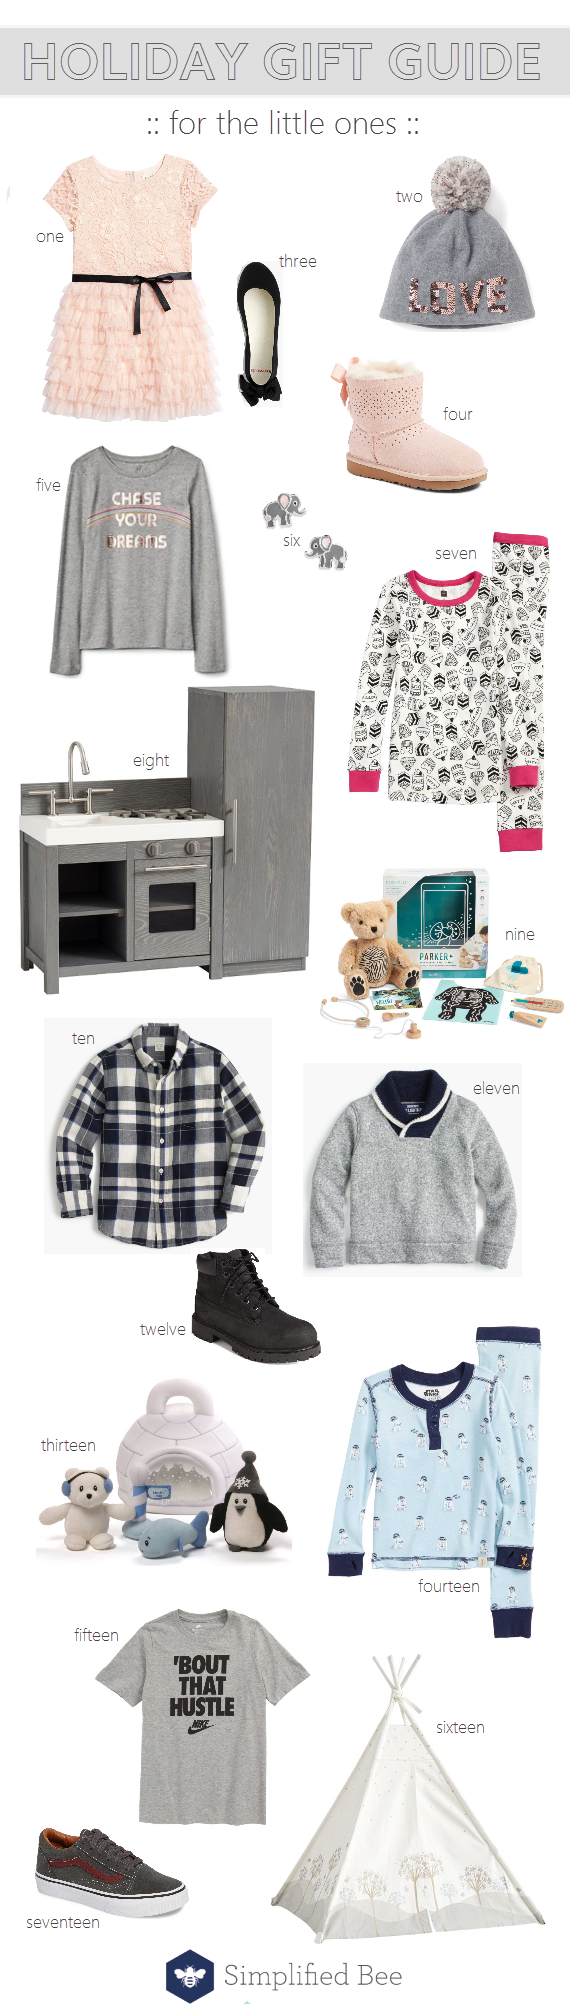 holiday gift guide for kids // @simplifiedbee #kidsgifts #giftguide #kids #holidaygifts #christmas